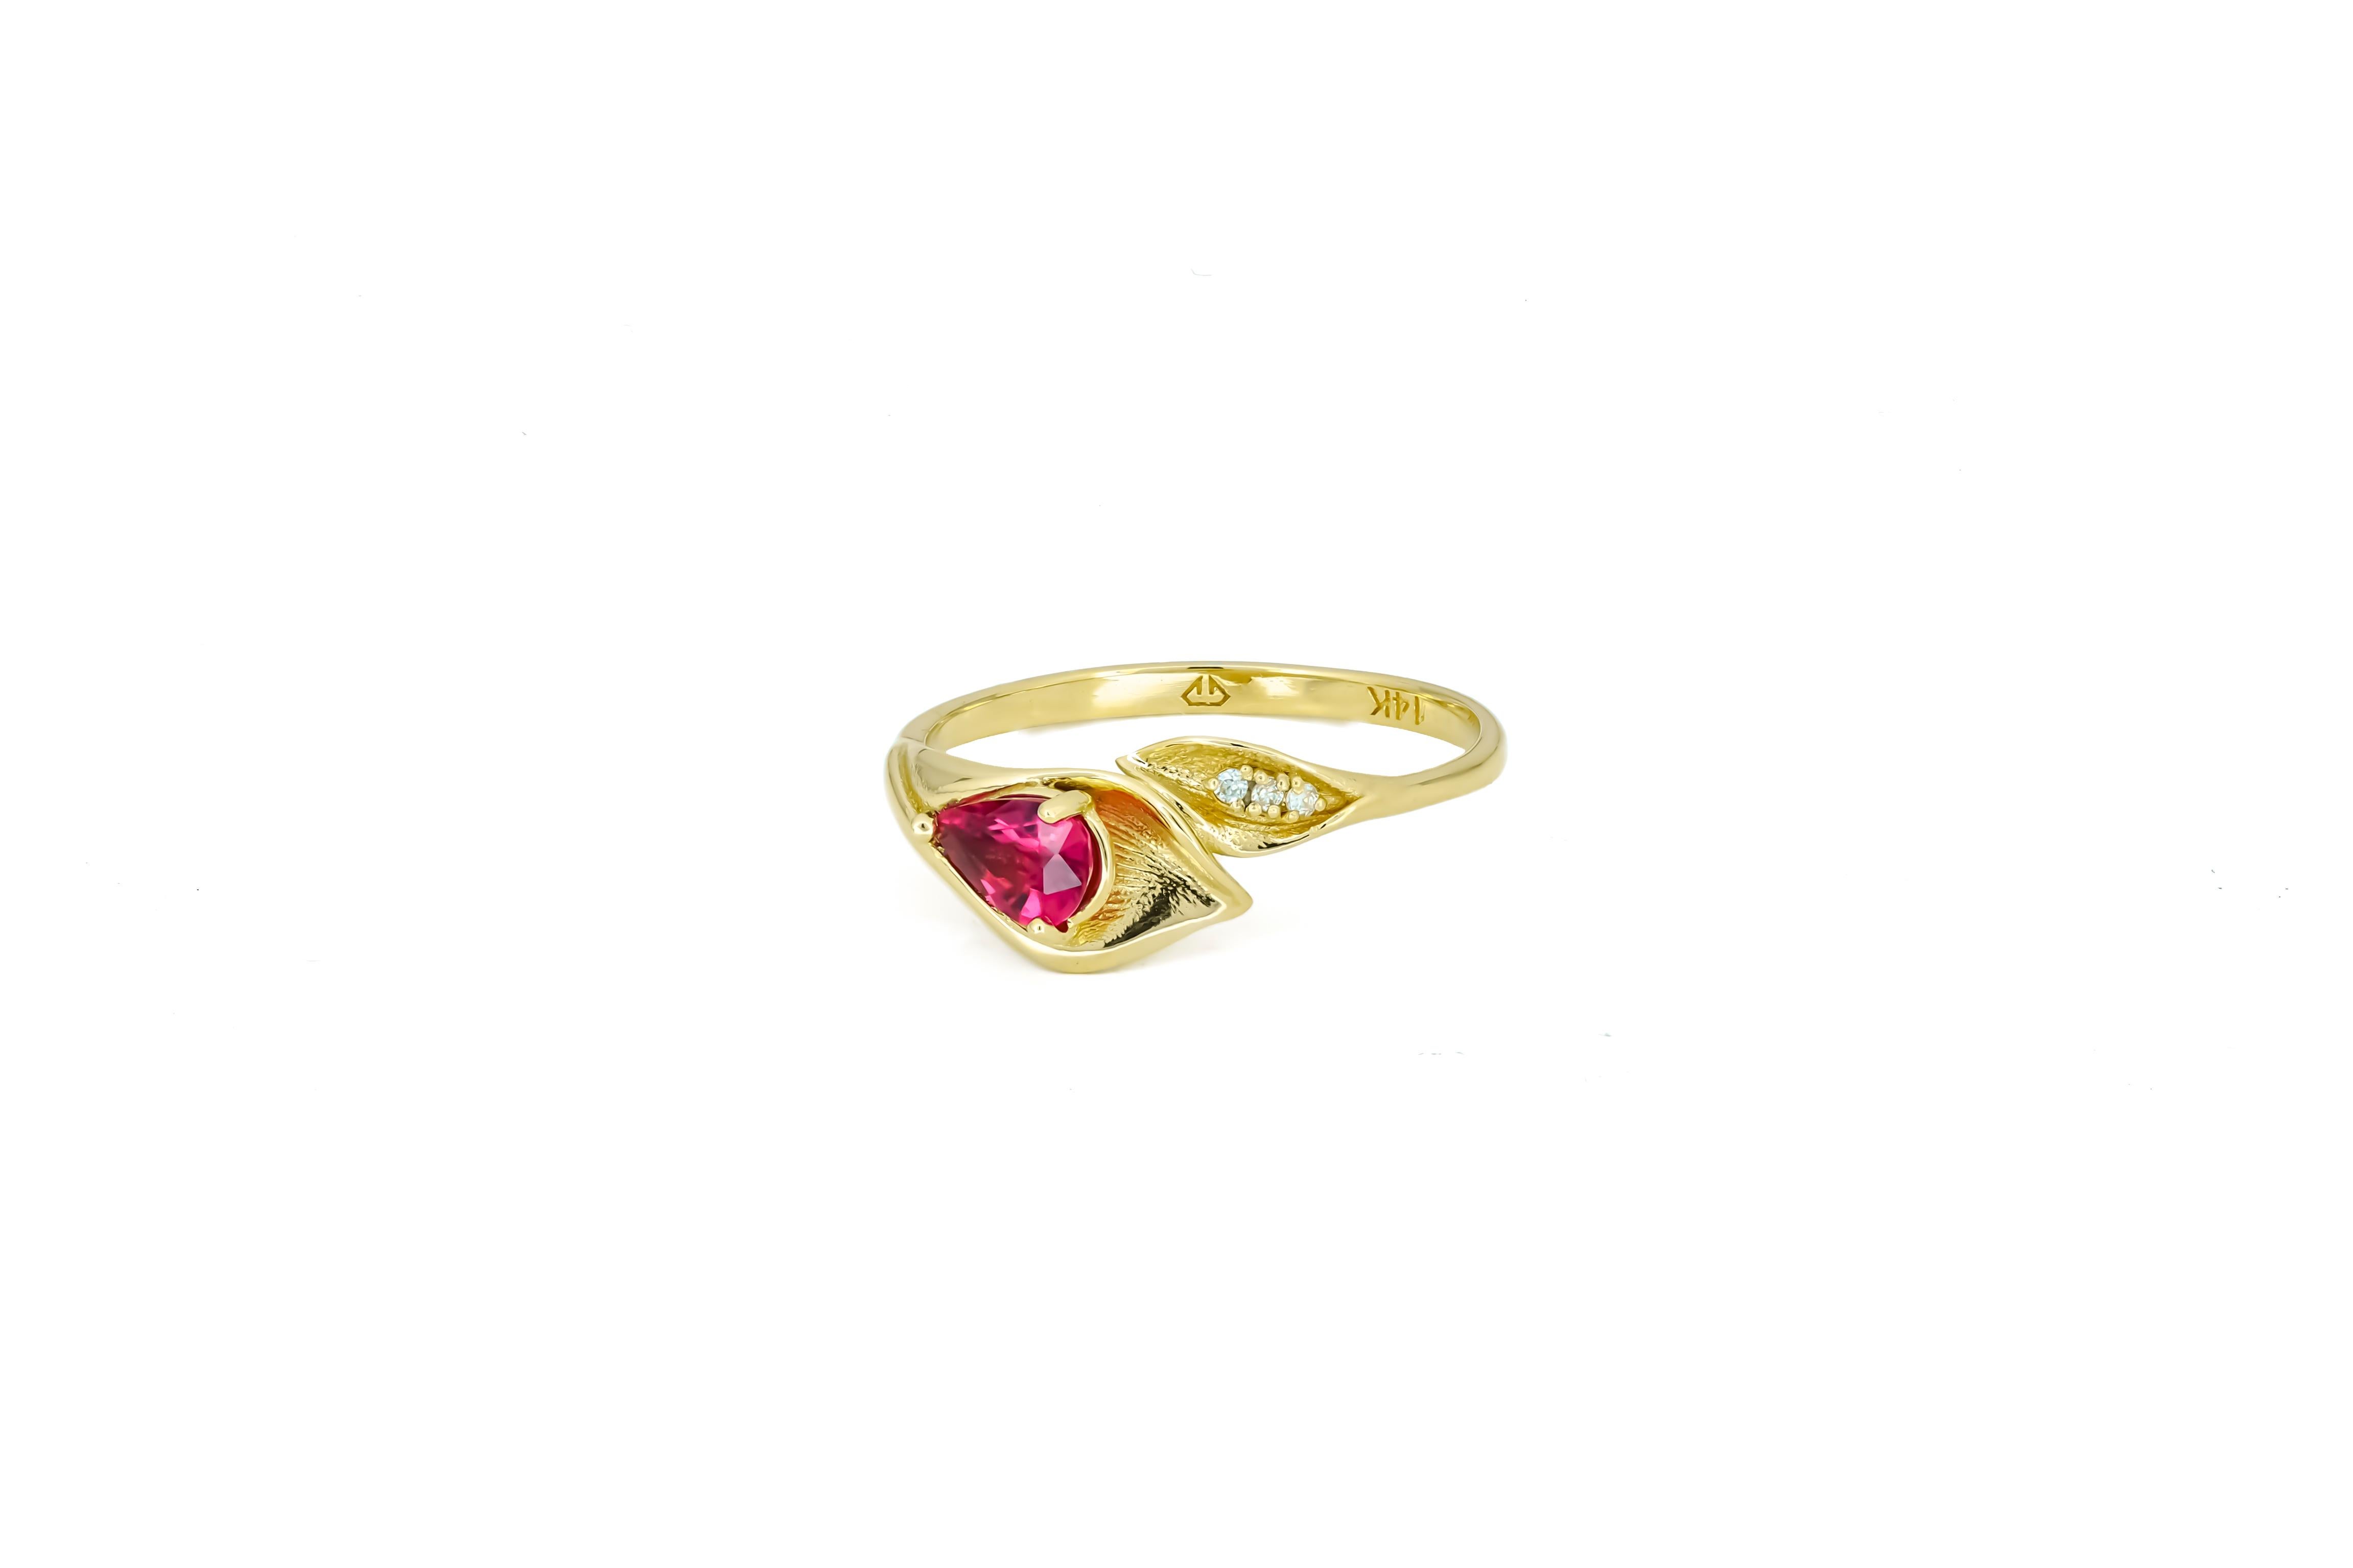 Lily Calla Gold Ring, 14 Karat Gold Ring with Garnet and Diamonds 2